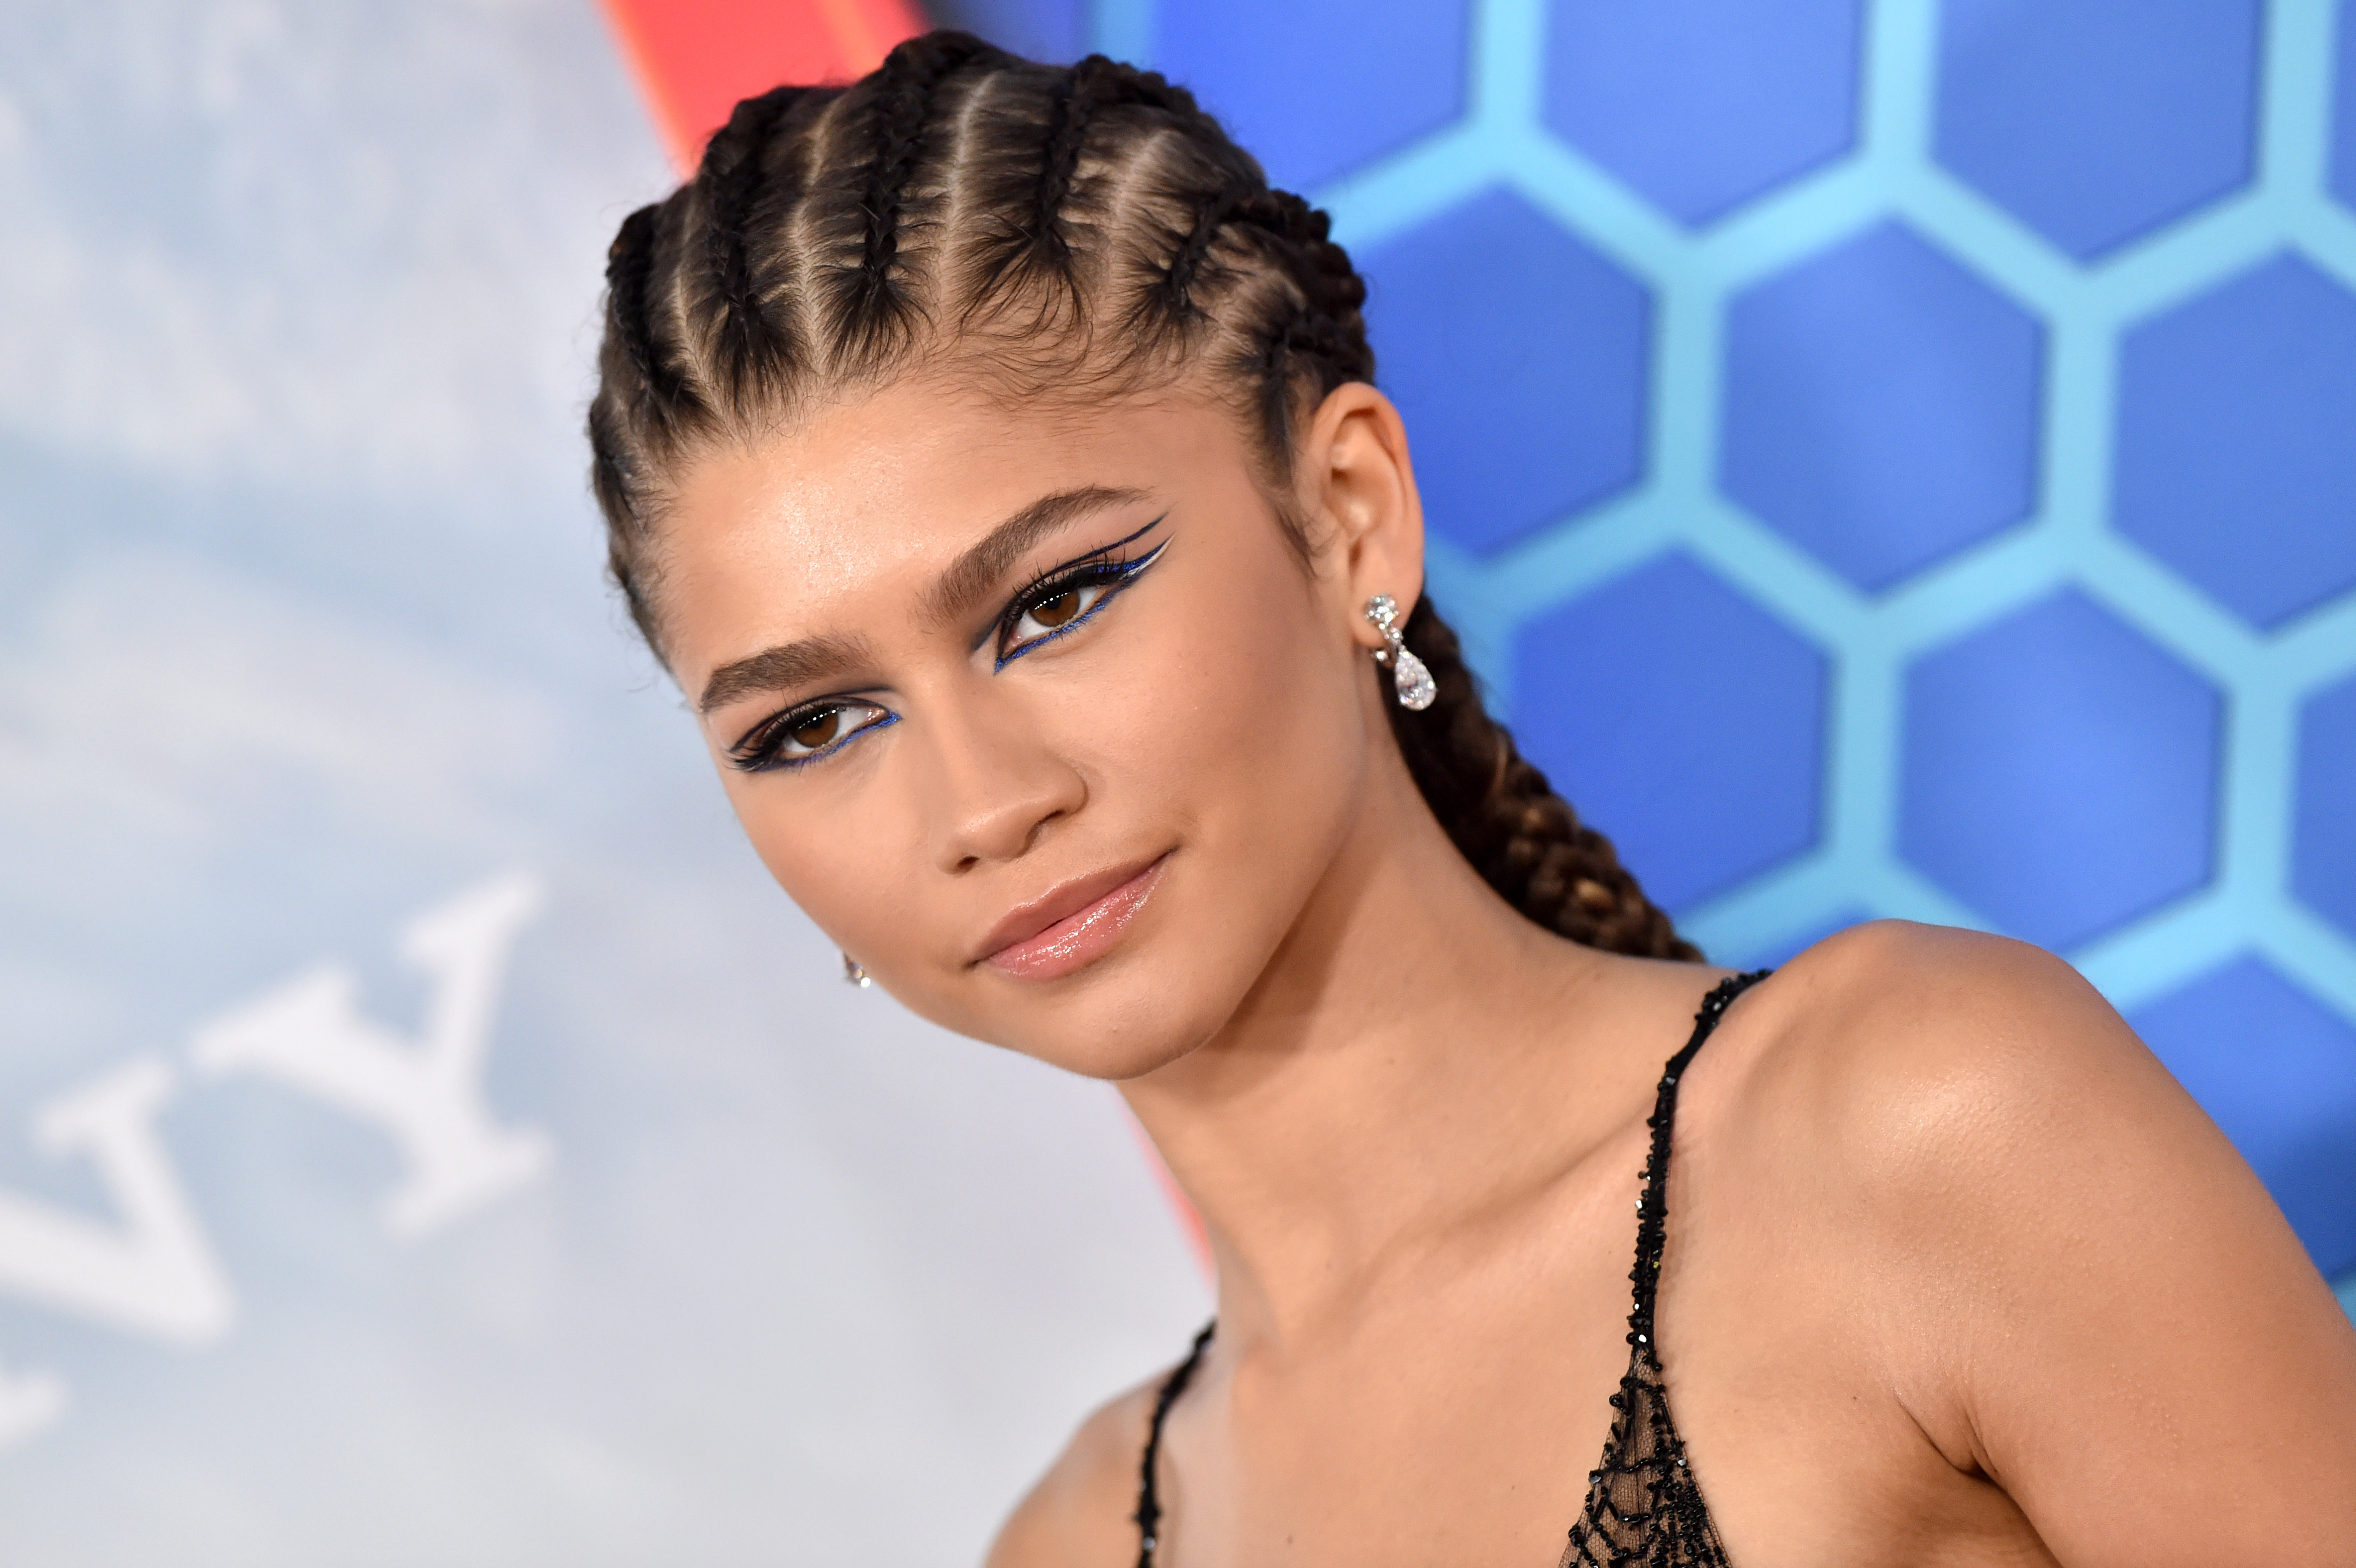 'Spider-Man: No Way Home' star Zendaya wears a black dress that is made to look like spider webs.